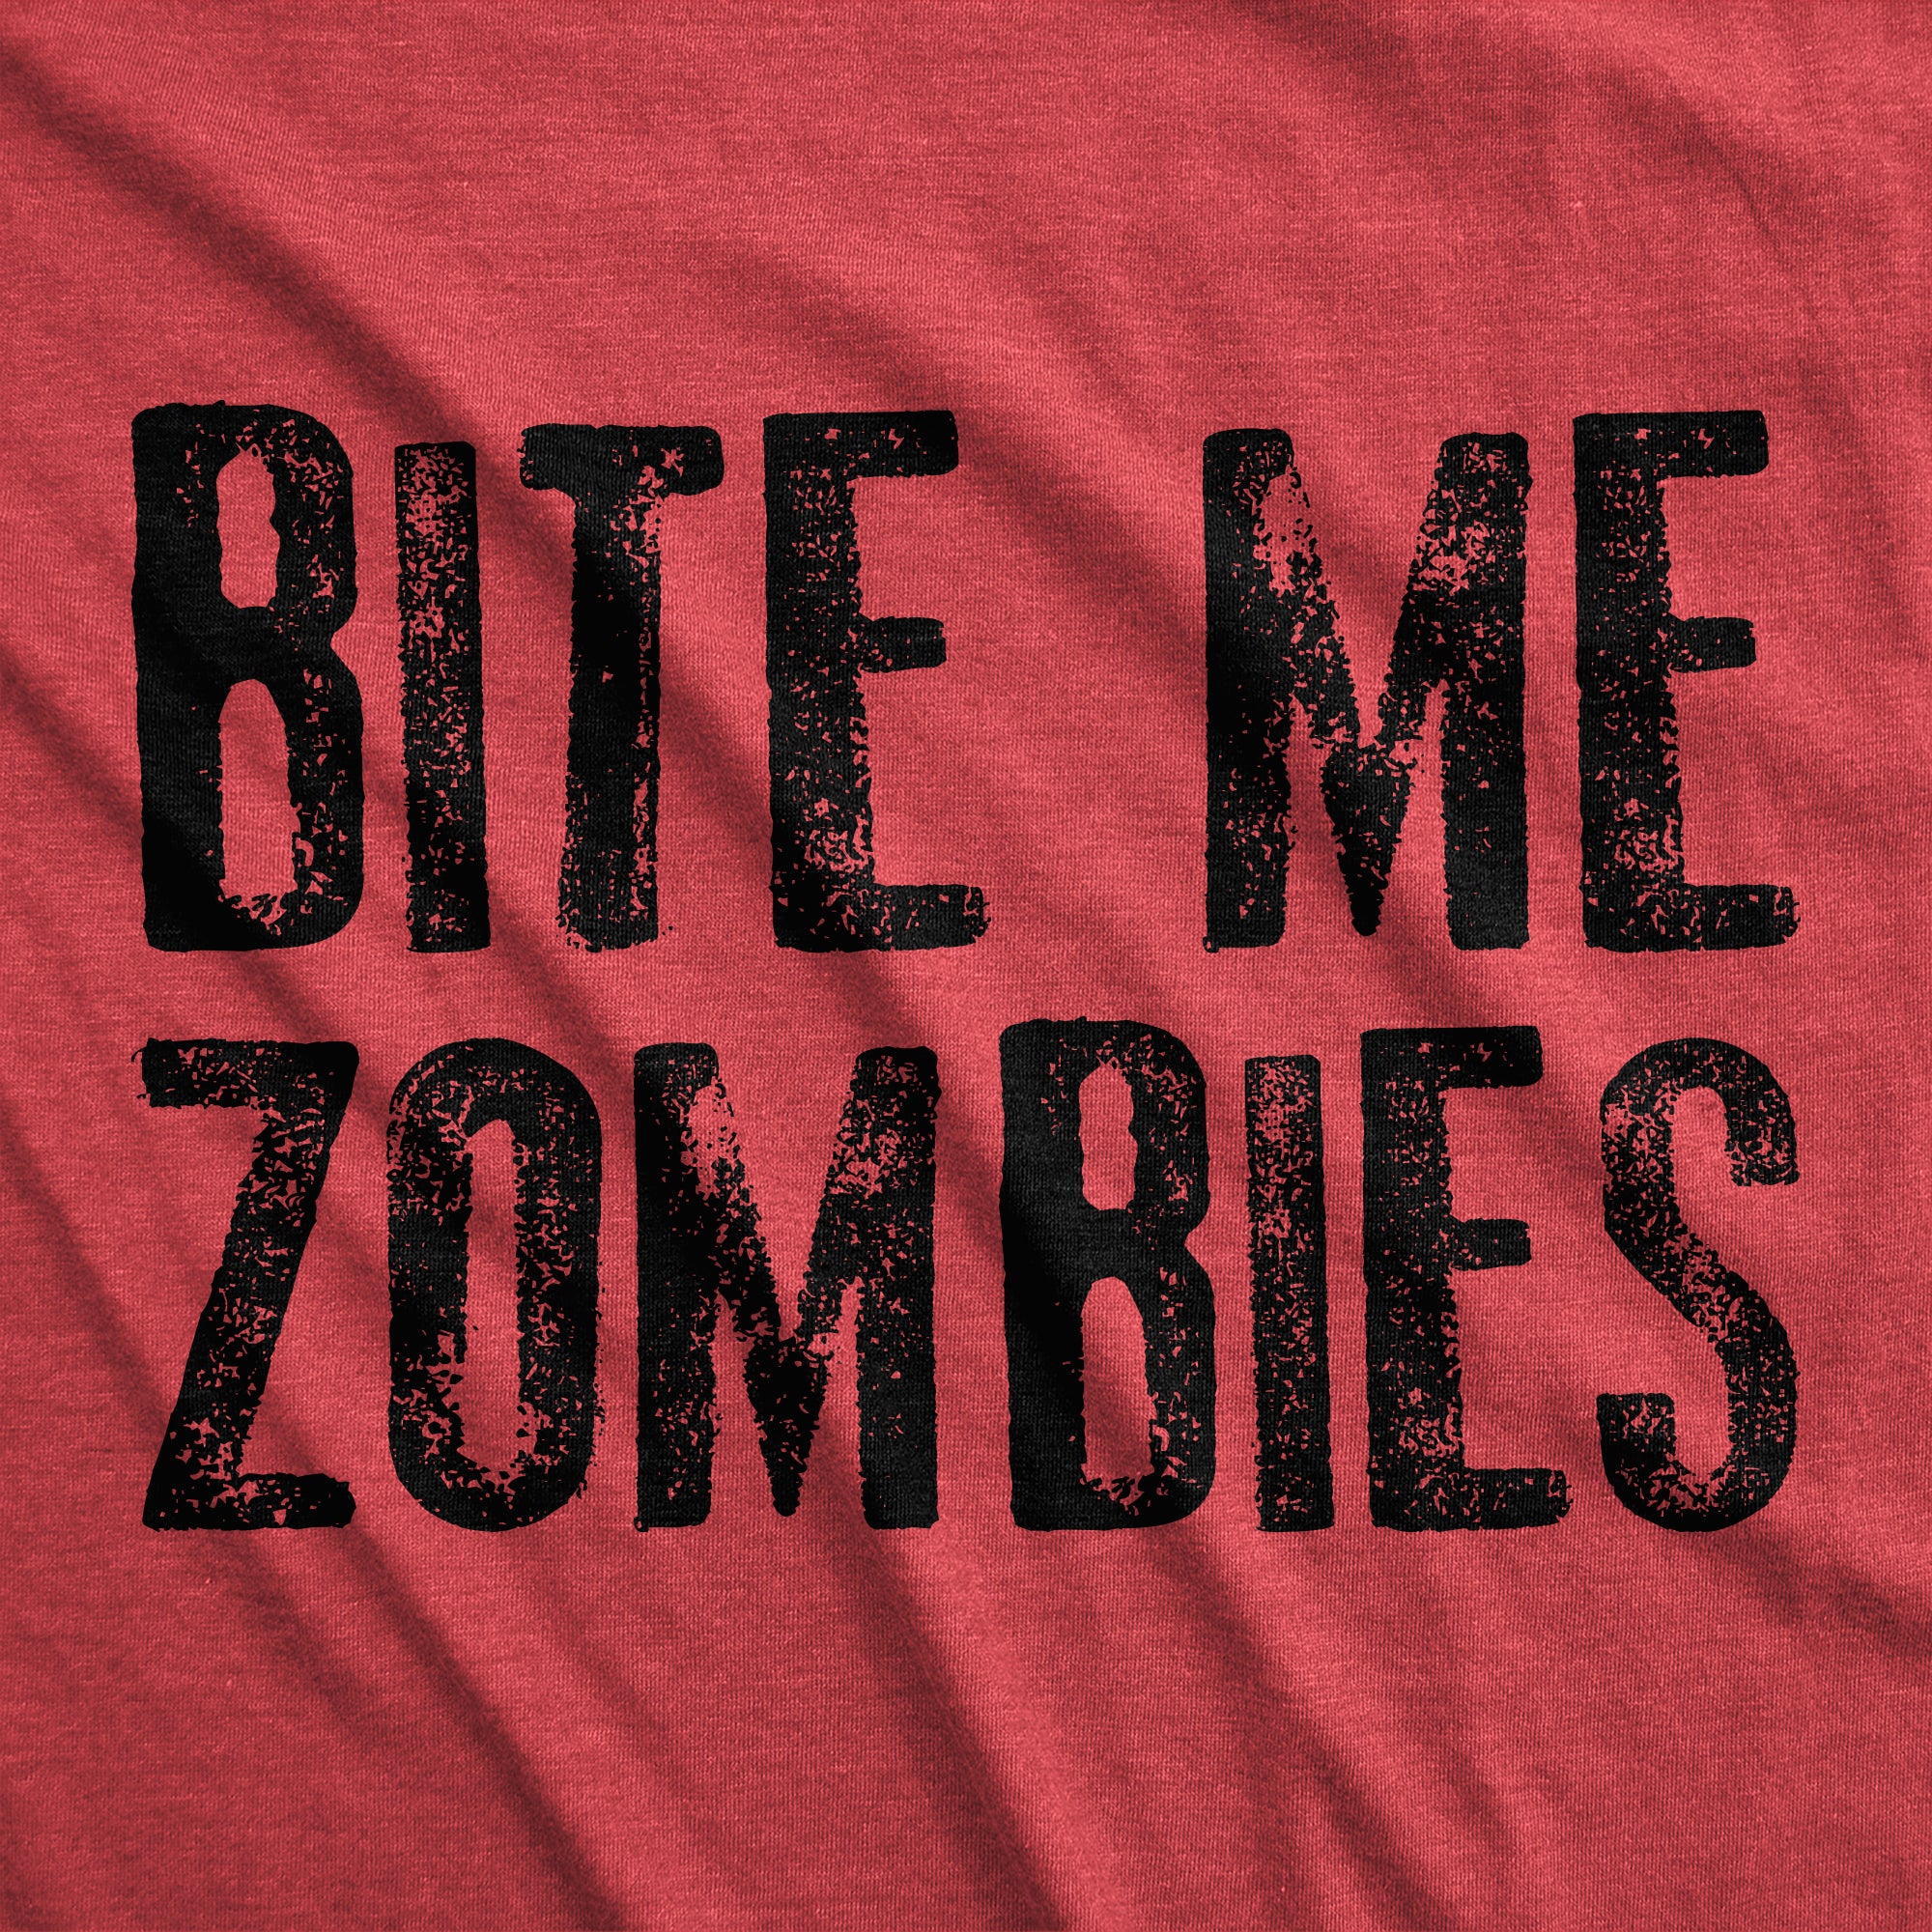 Funny Heather Red - Bite Me Bite Me Zombies Mens T Shirt Nerdy Halloween Zombie Tee